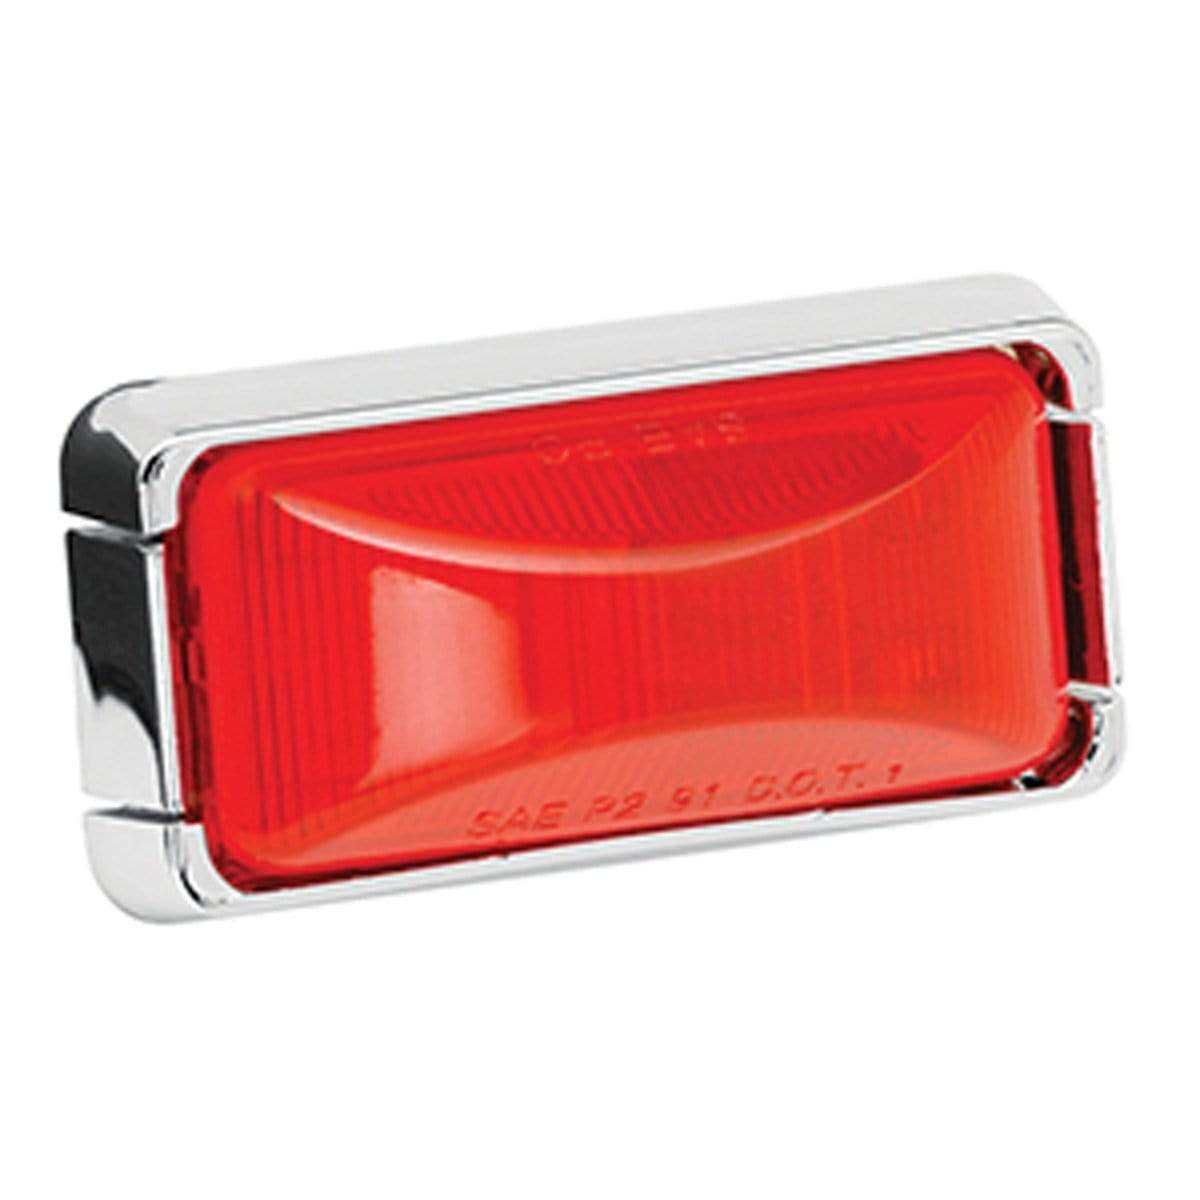 Wesbar Qualifies for Free Shipping Wesbar Clearance/Side Marker Lights Waterproof Red Chrome Base #203295